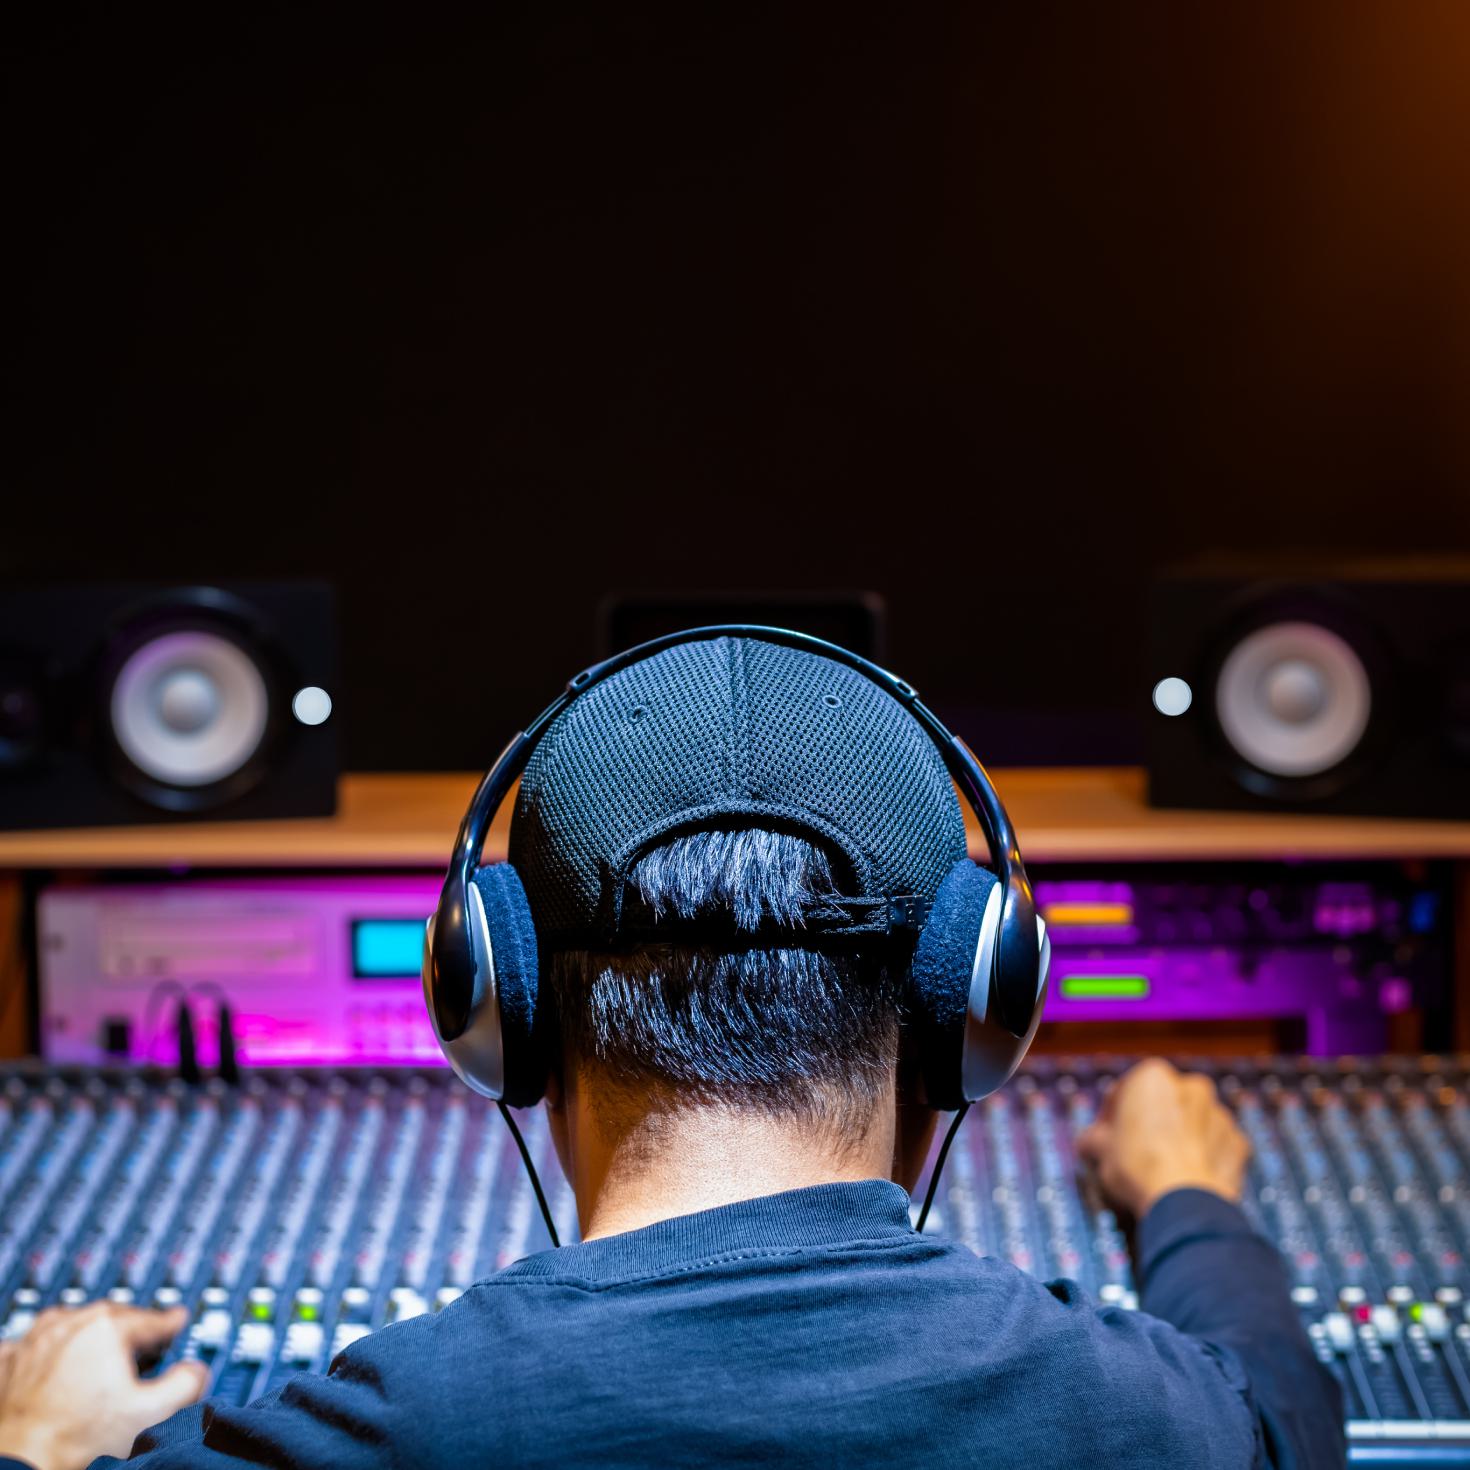 A man in a music studio wearing headphones while adjusting a mixing desk.